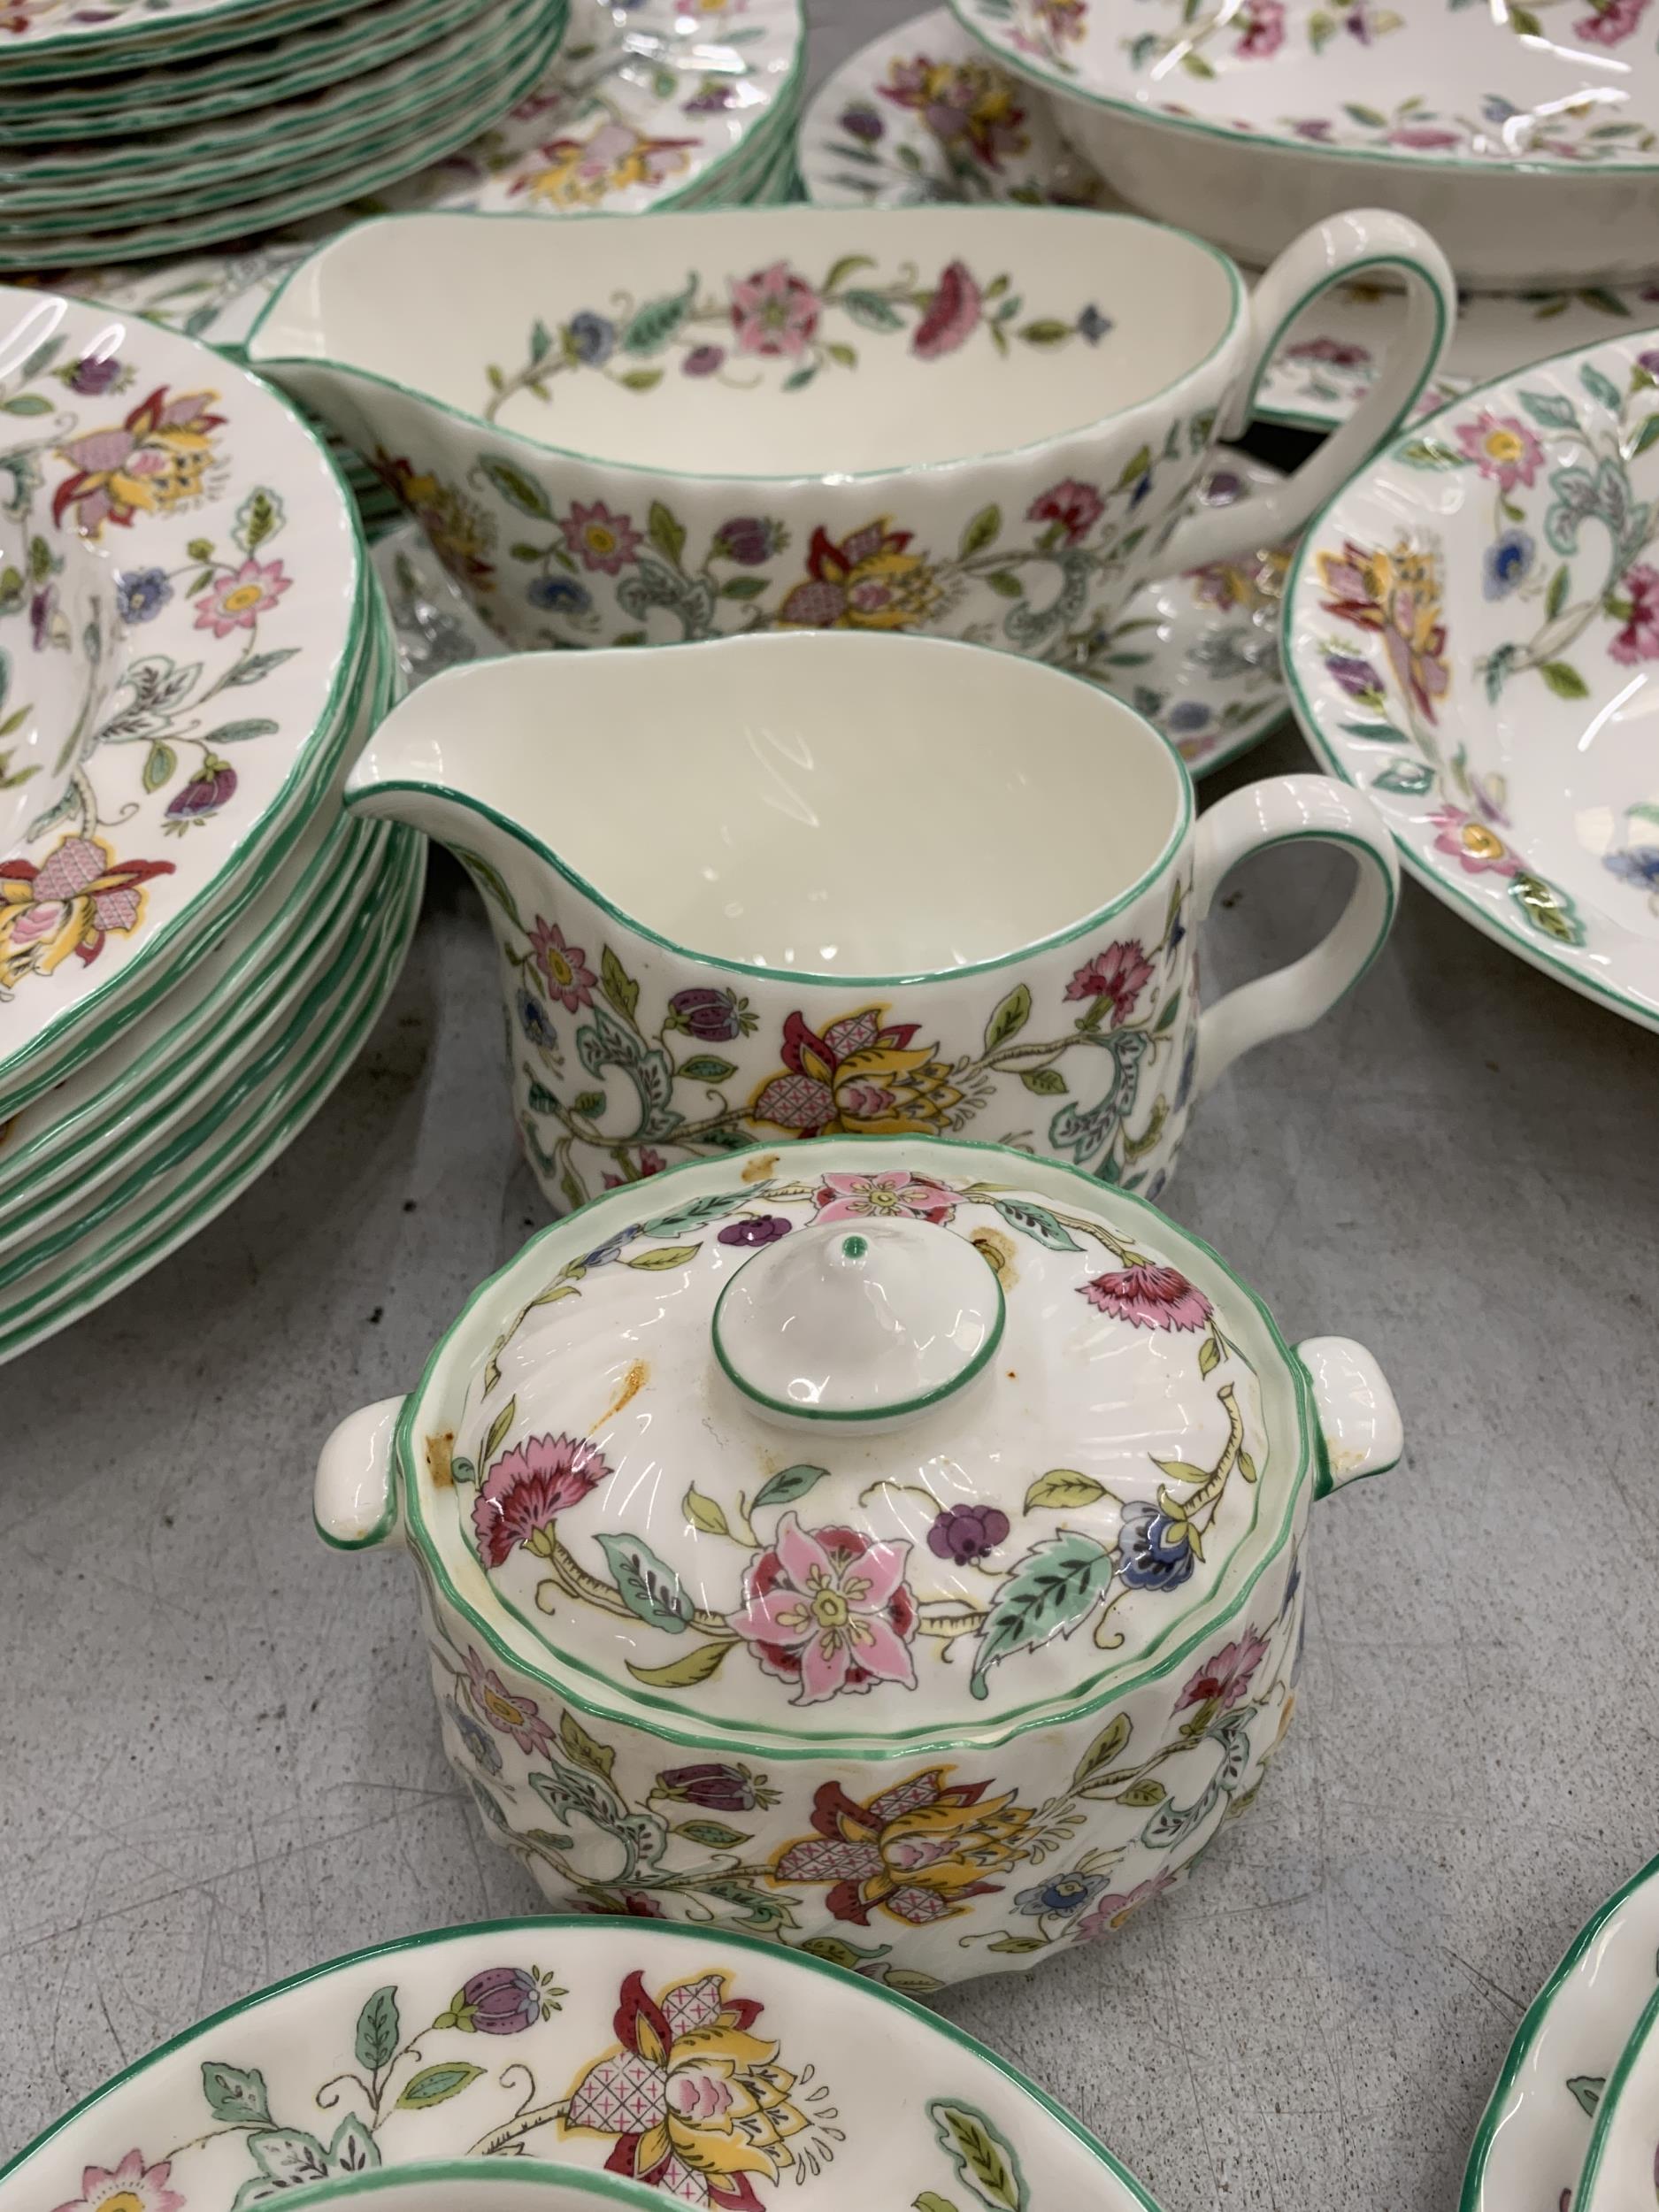 A LARGE QUANTITY OF MINTON HADDON HALL TO INCLUDE SERVING BOWLS, PLATTER, DINNER PLATES, SOUP BOWLS, - Image 3 of 7